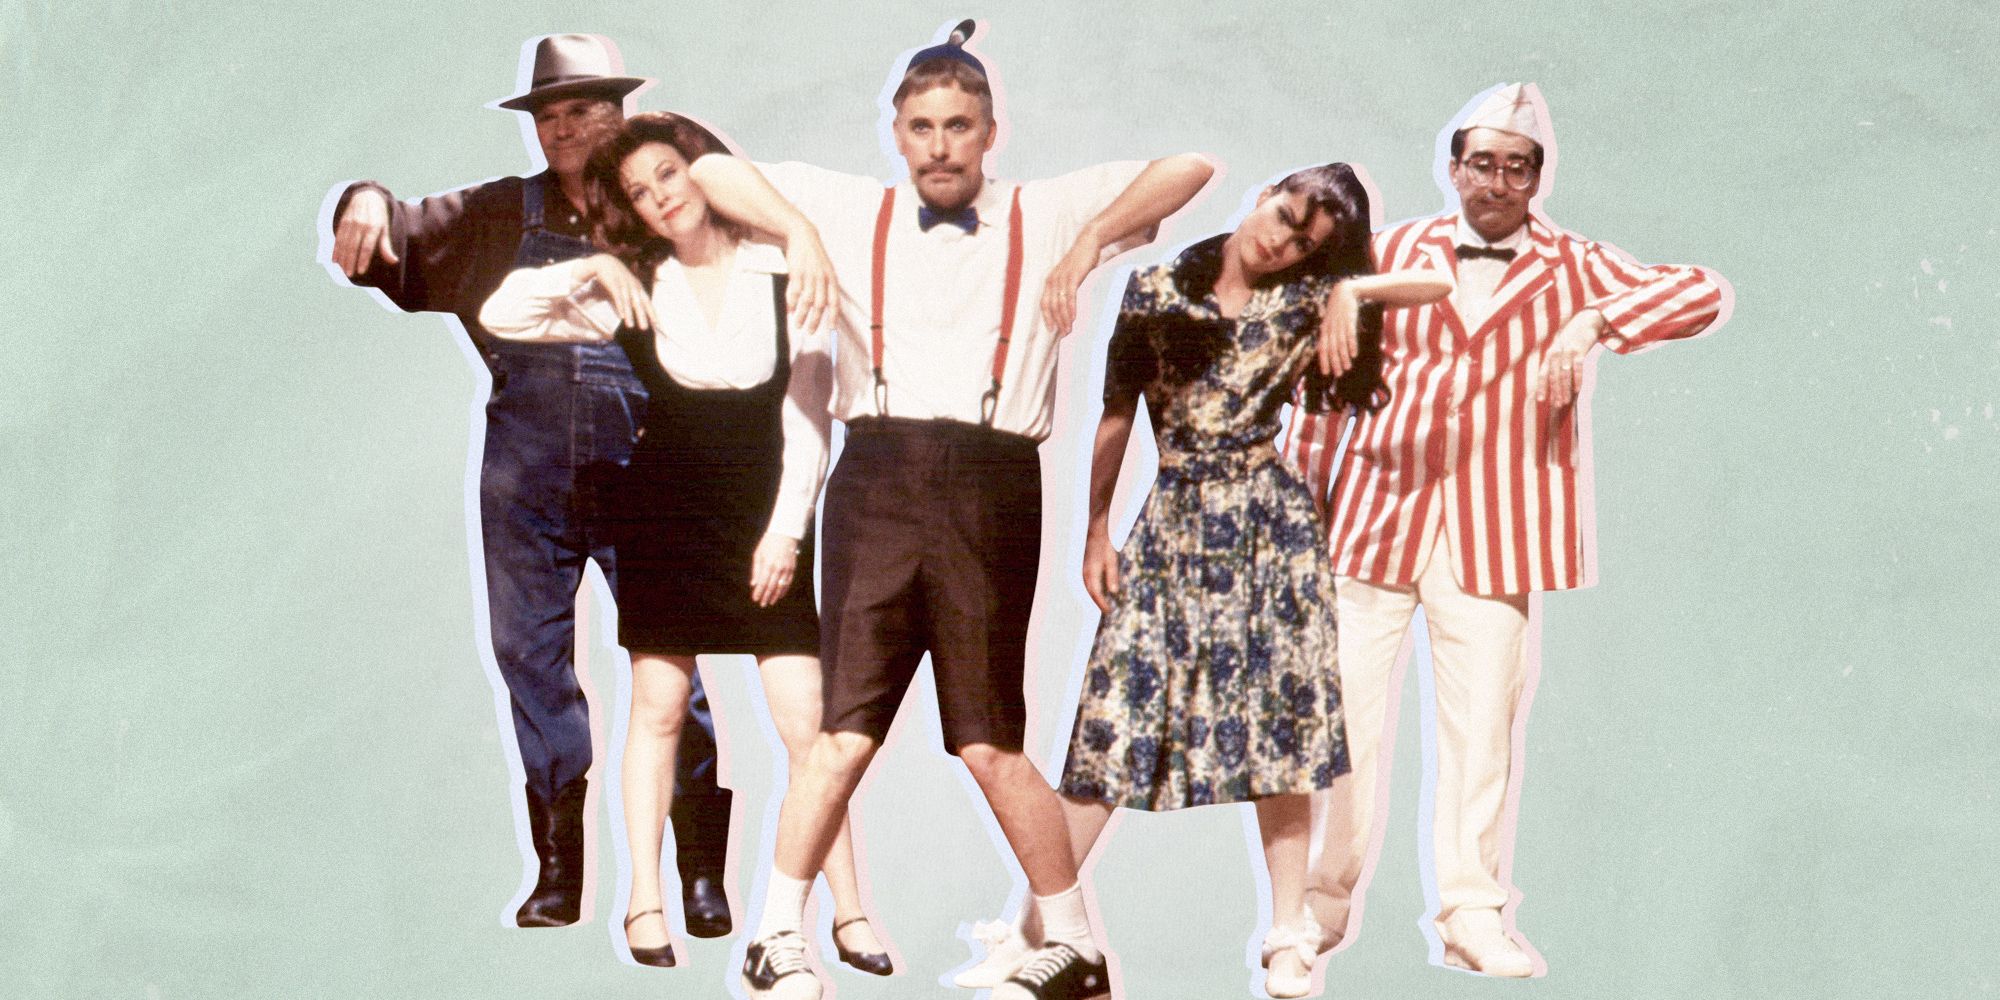 Does Waiting For Guffman Hold Up 25 Years Later? Now I See the Problem With the Christopher Guest Comedy photo